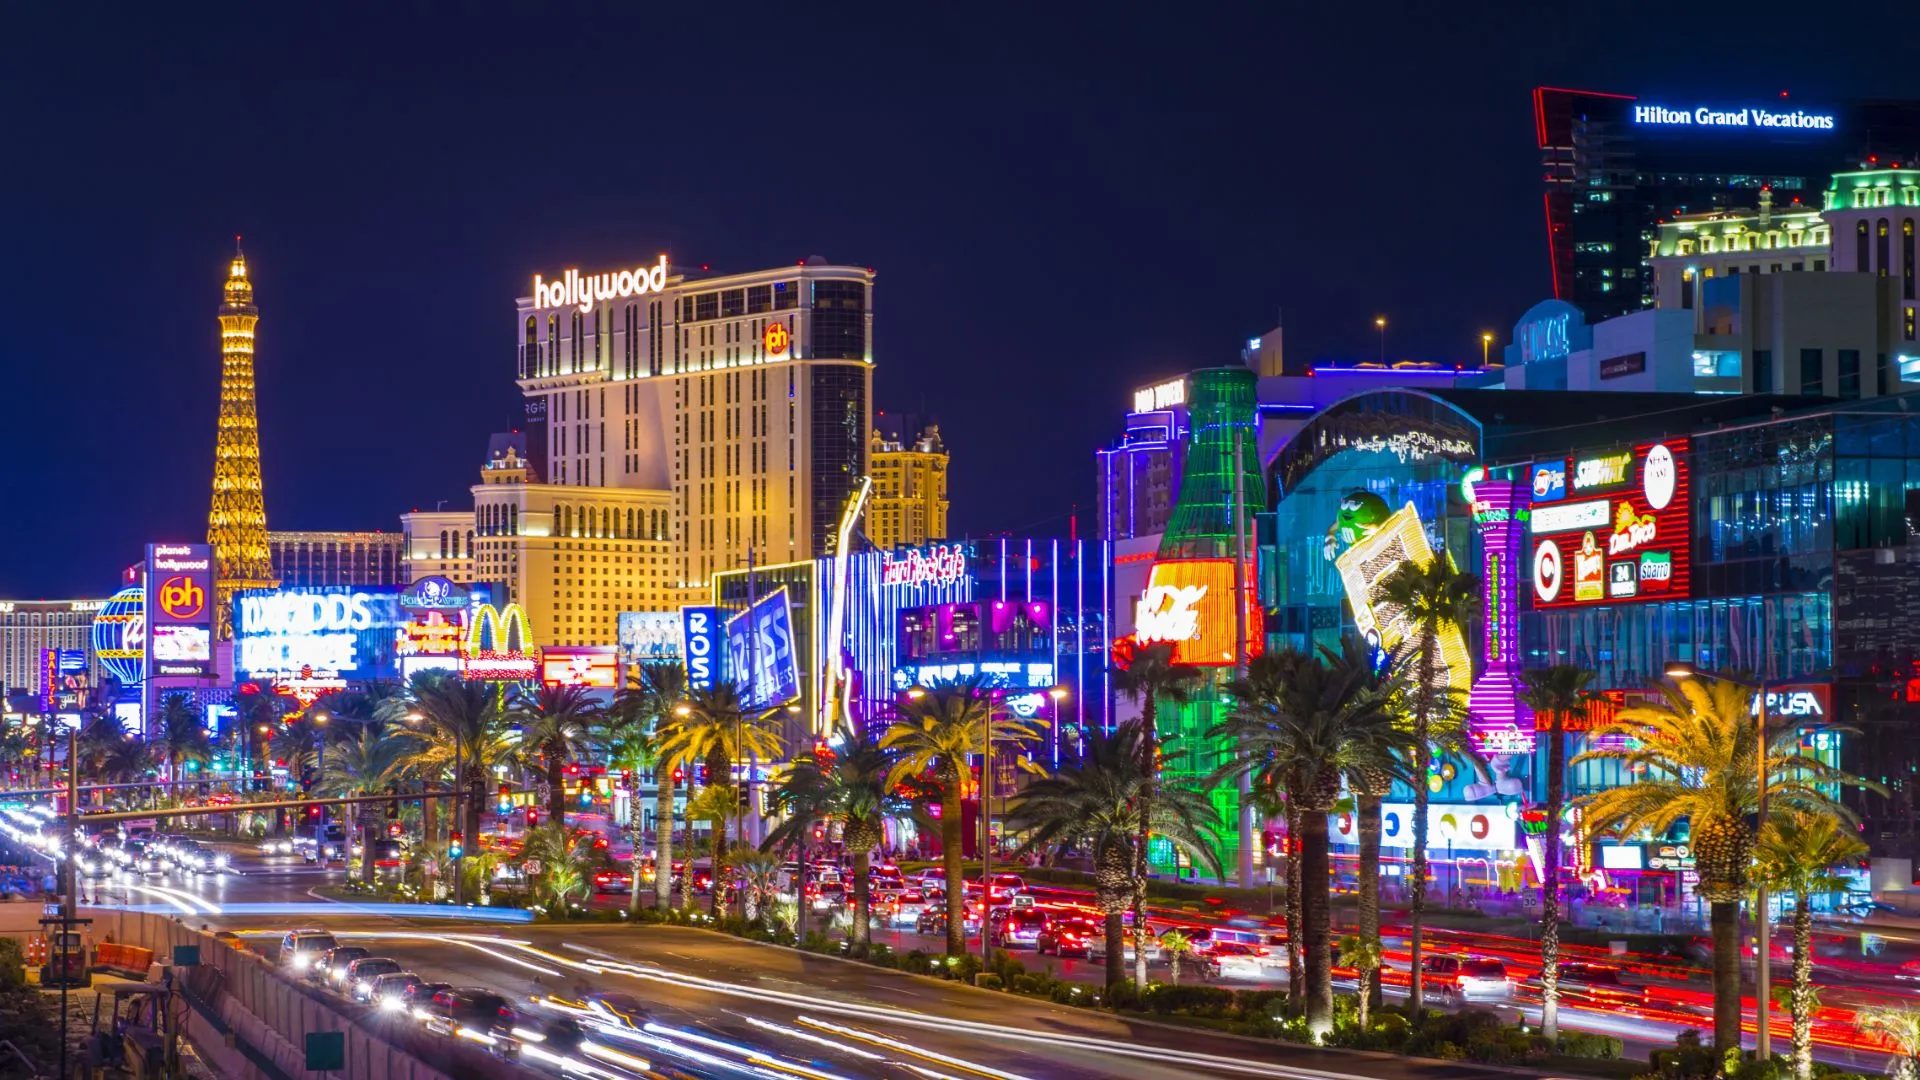 5 Ways To Get The Most Out Of AWS re:Invent 2015